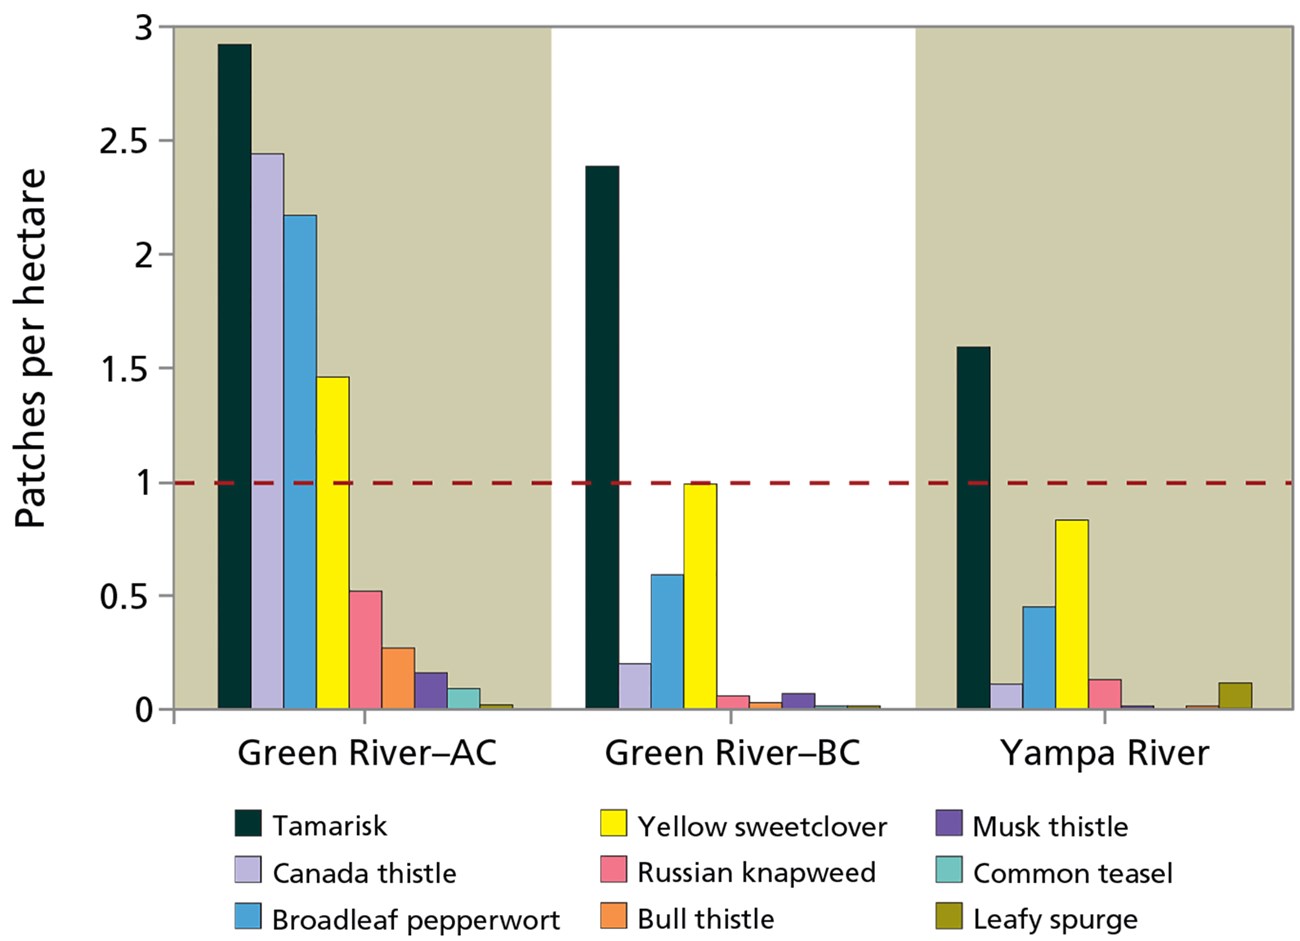 Graphic showing patches of invasive plants per hectare on the Green and Yampa rivers